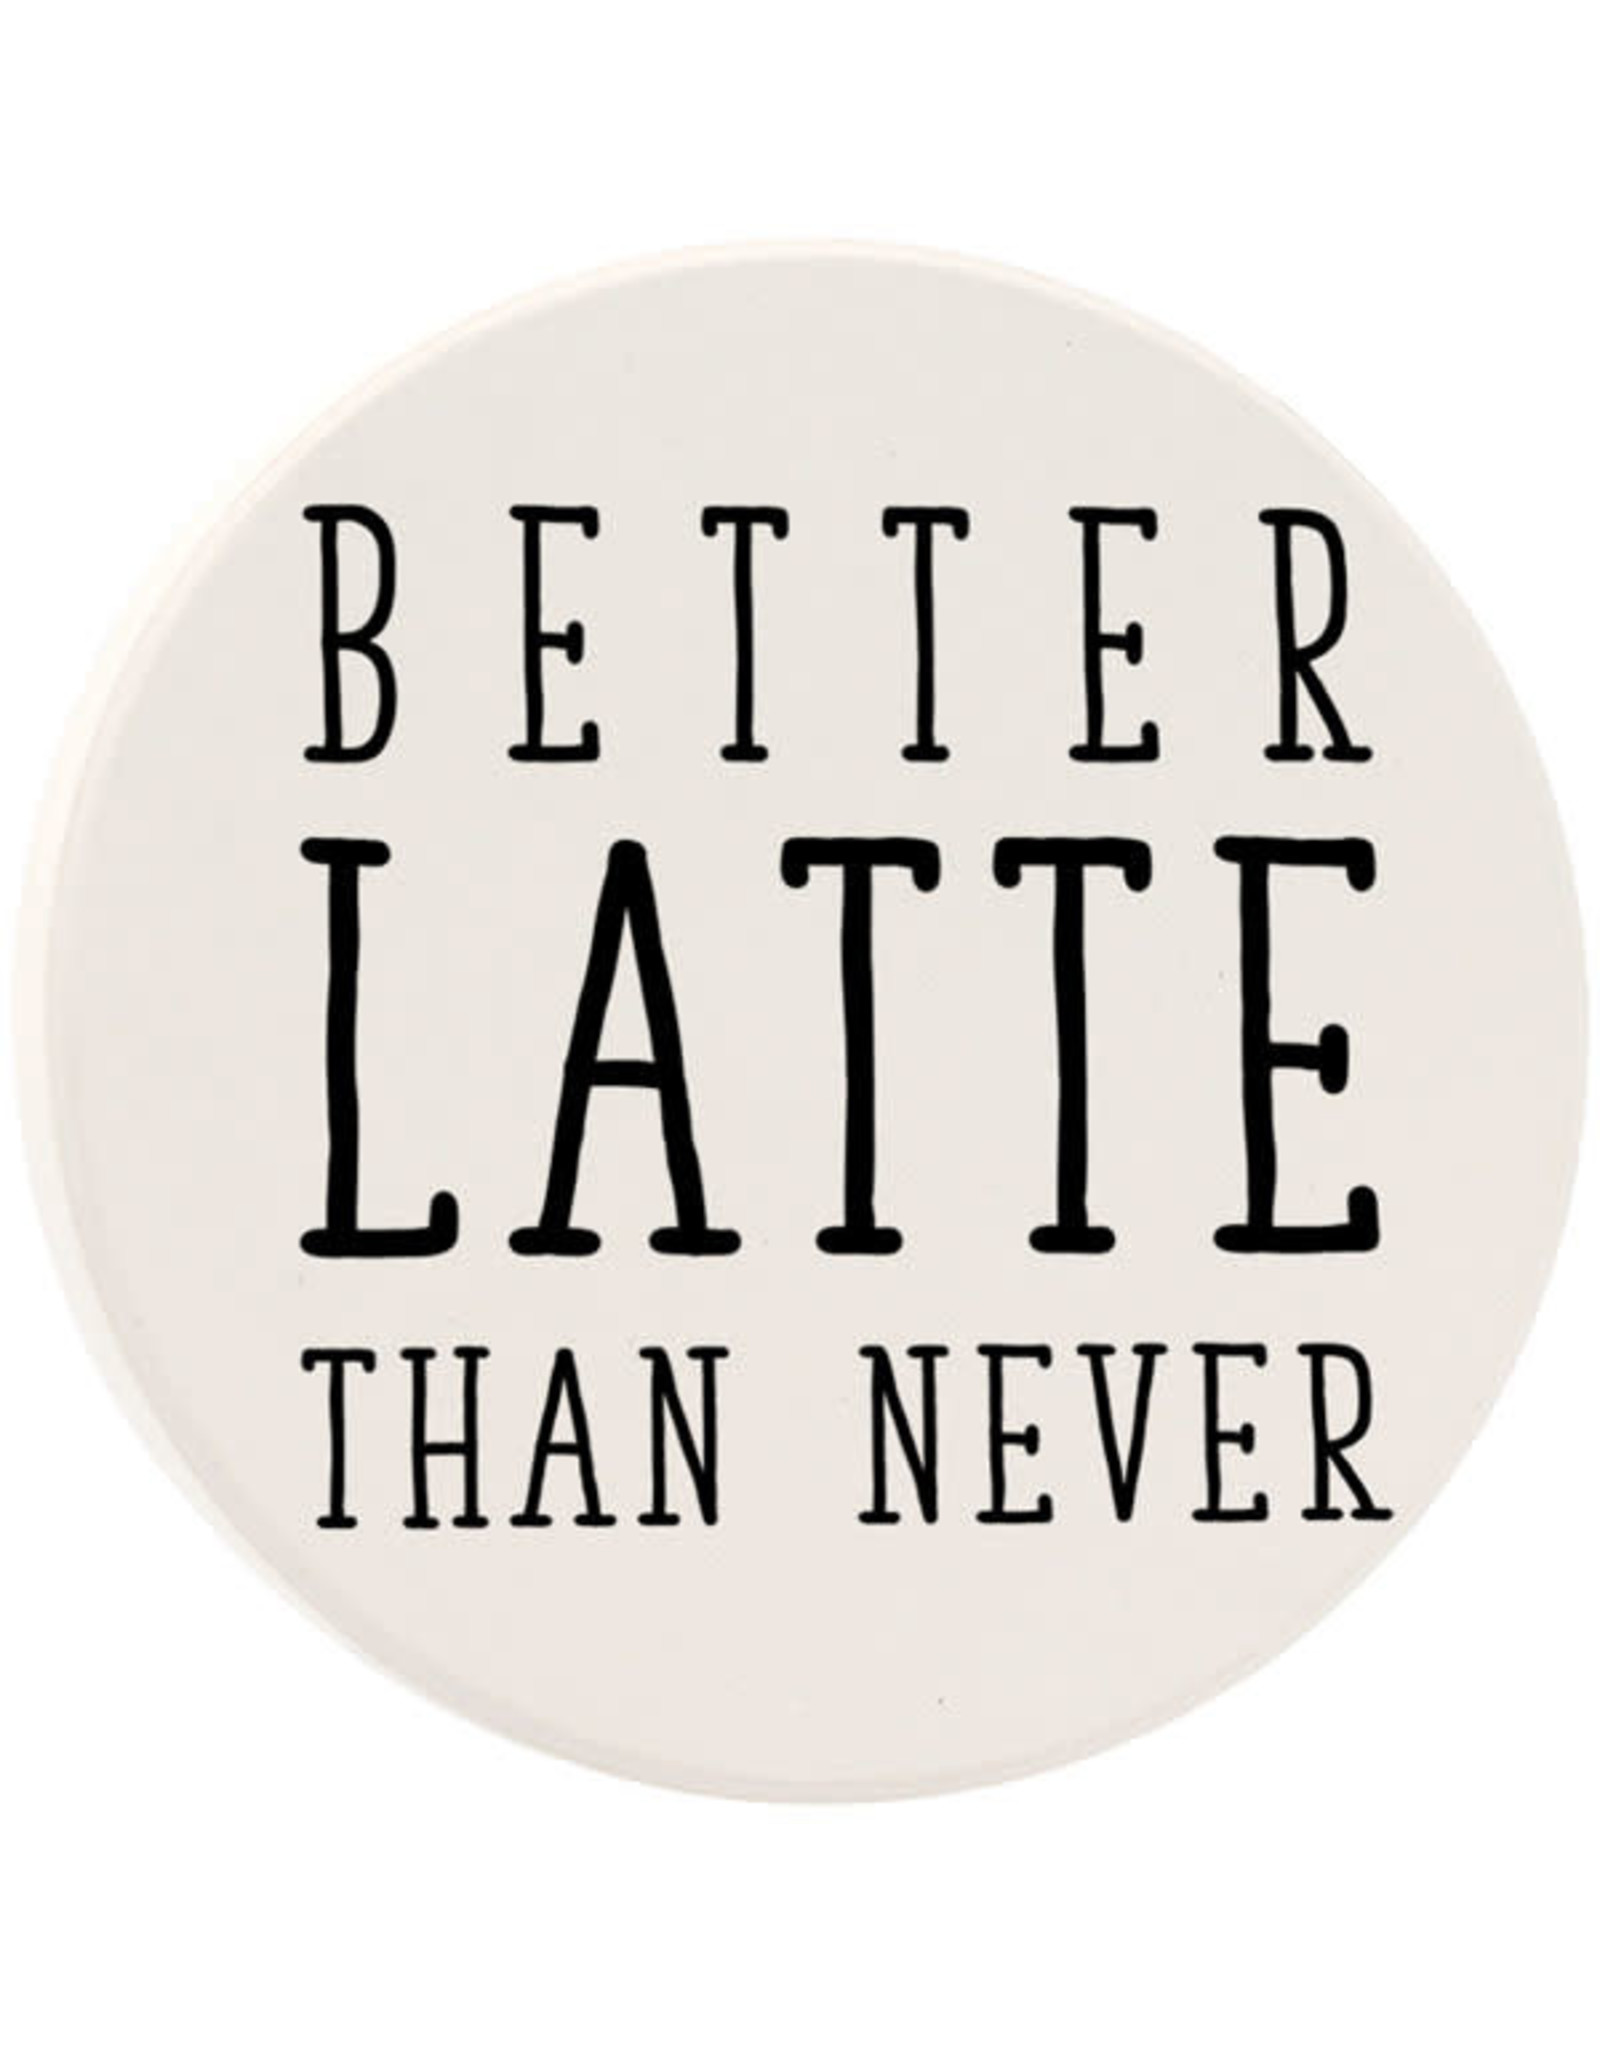 Tipsy Coasters & Gifts Better Latte than Never Car Coaster